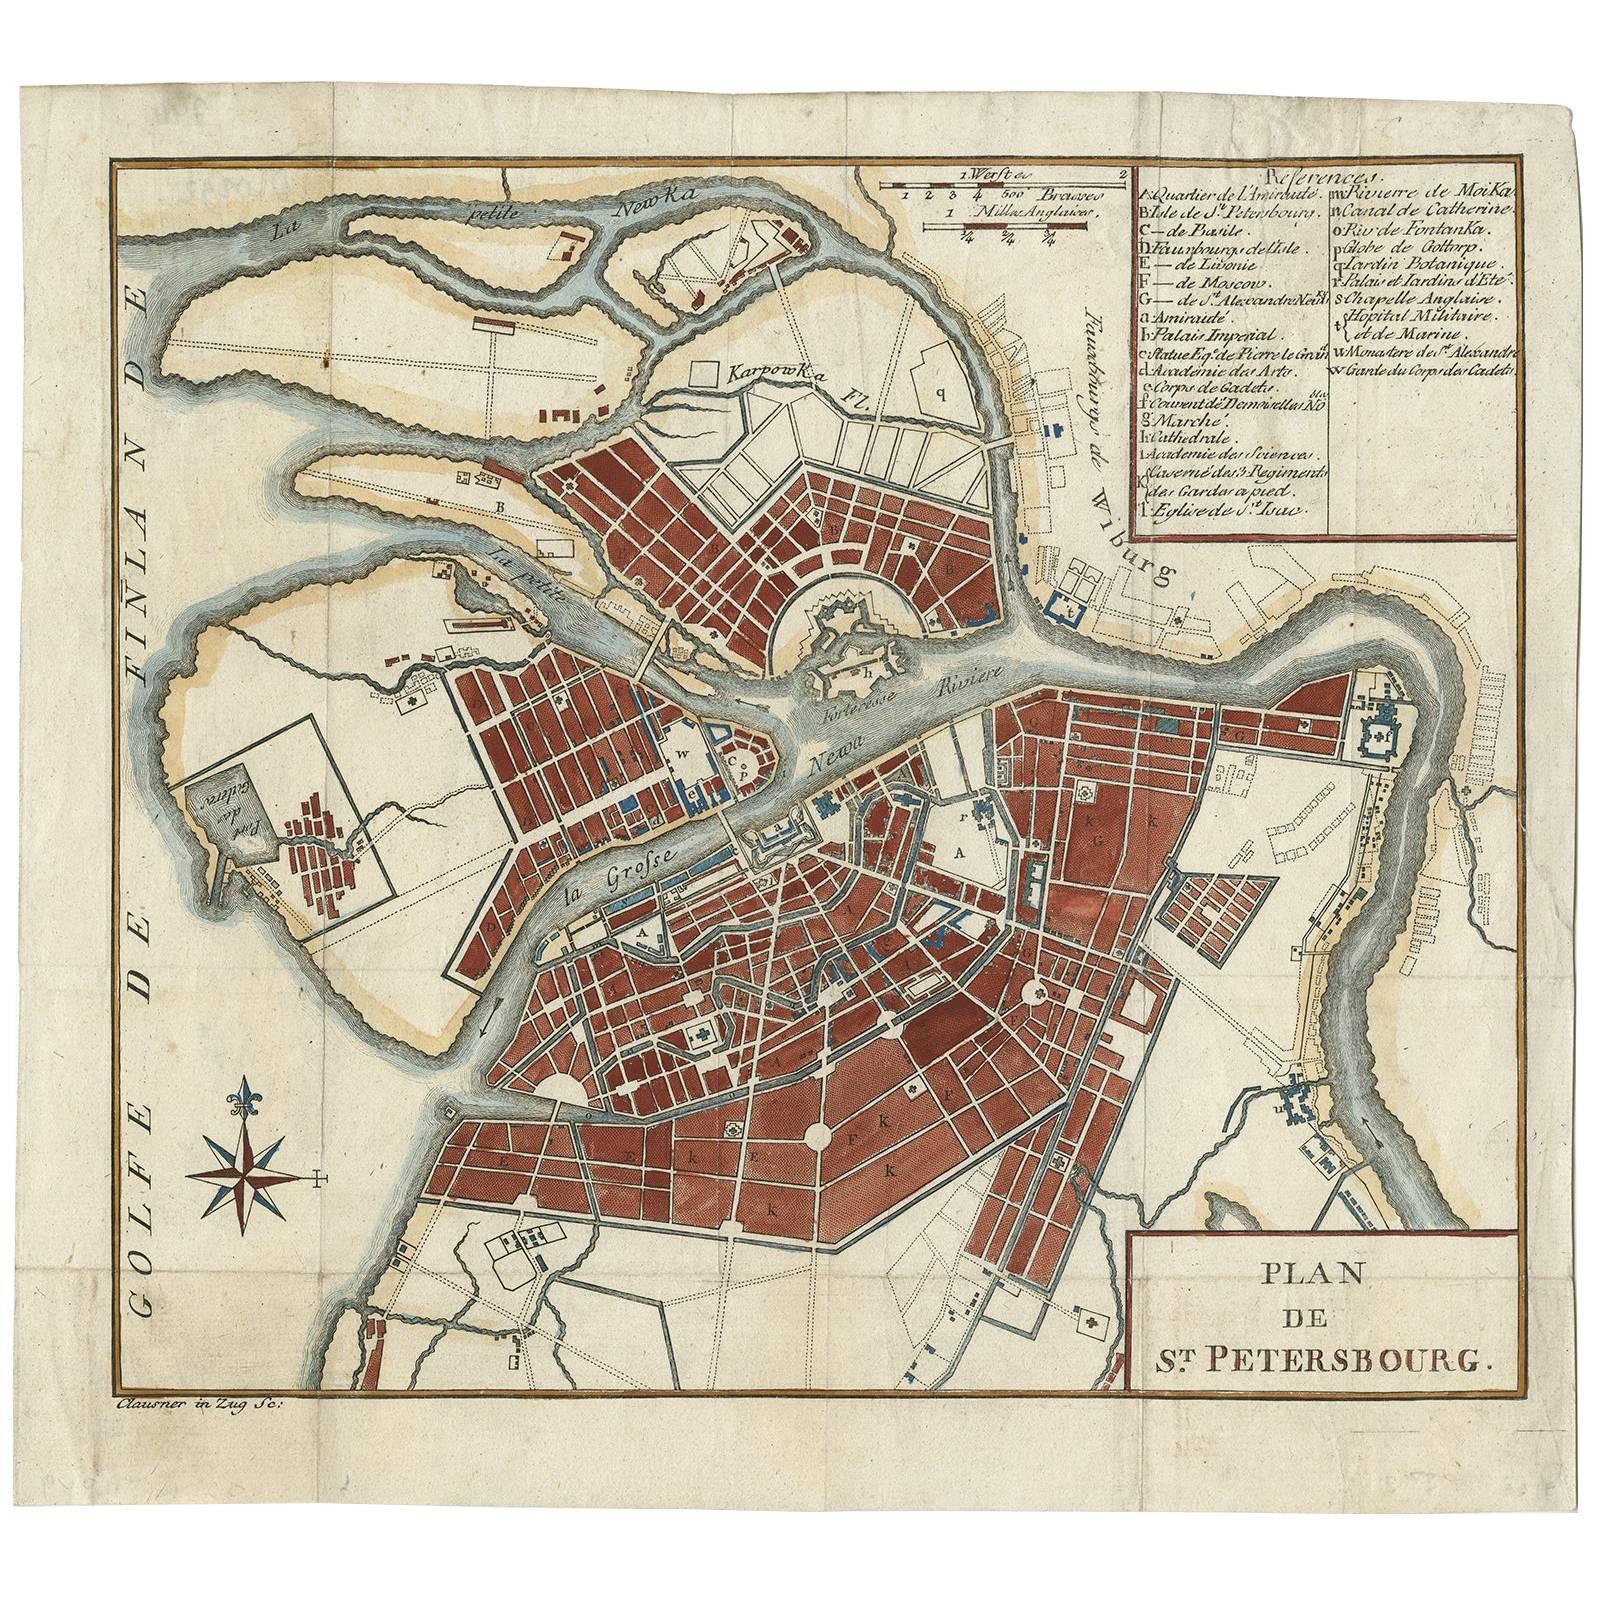 Antique Town Plan of St. Petersburg 'Russia' by J.J. Clausner, circa 1785